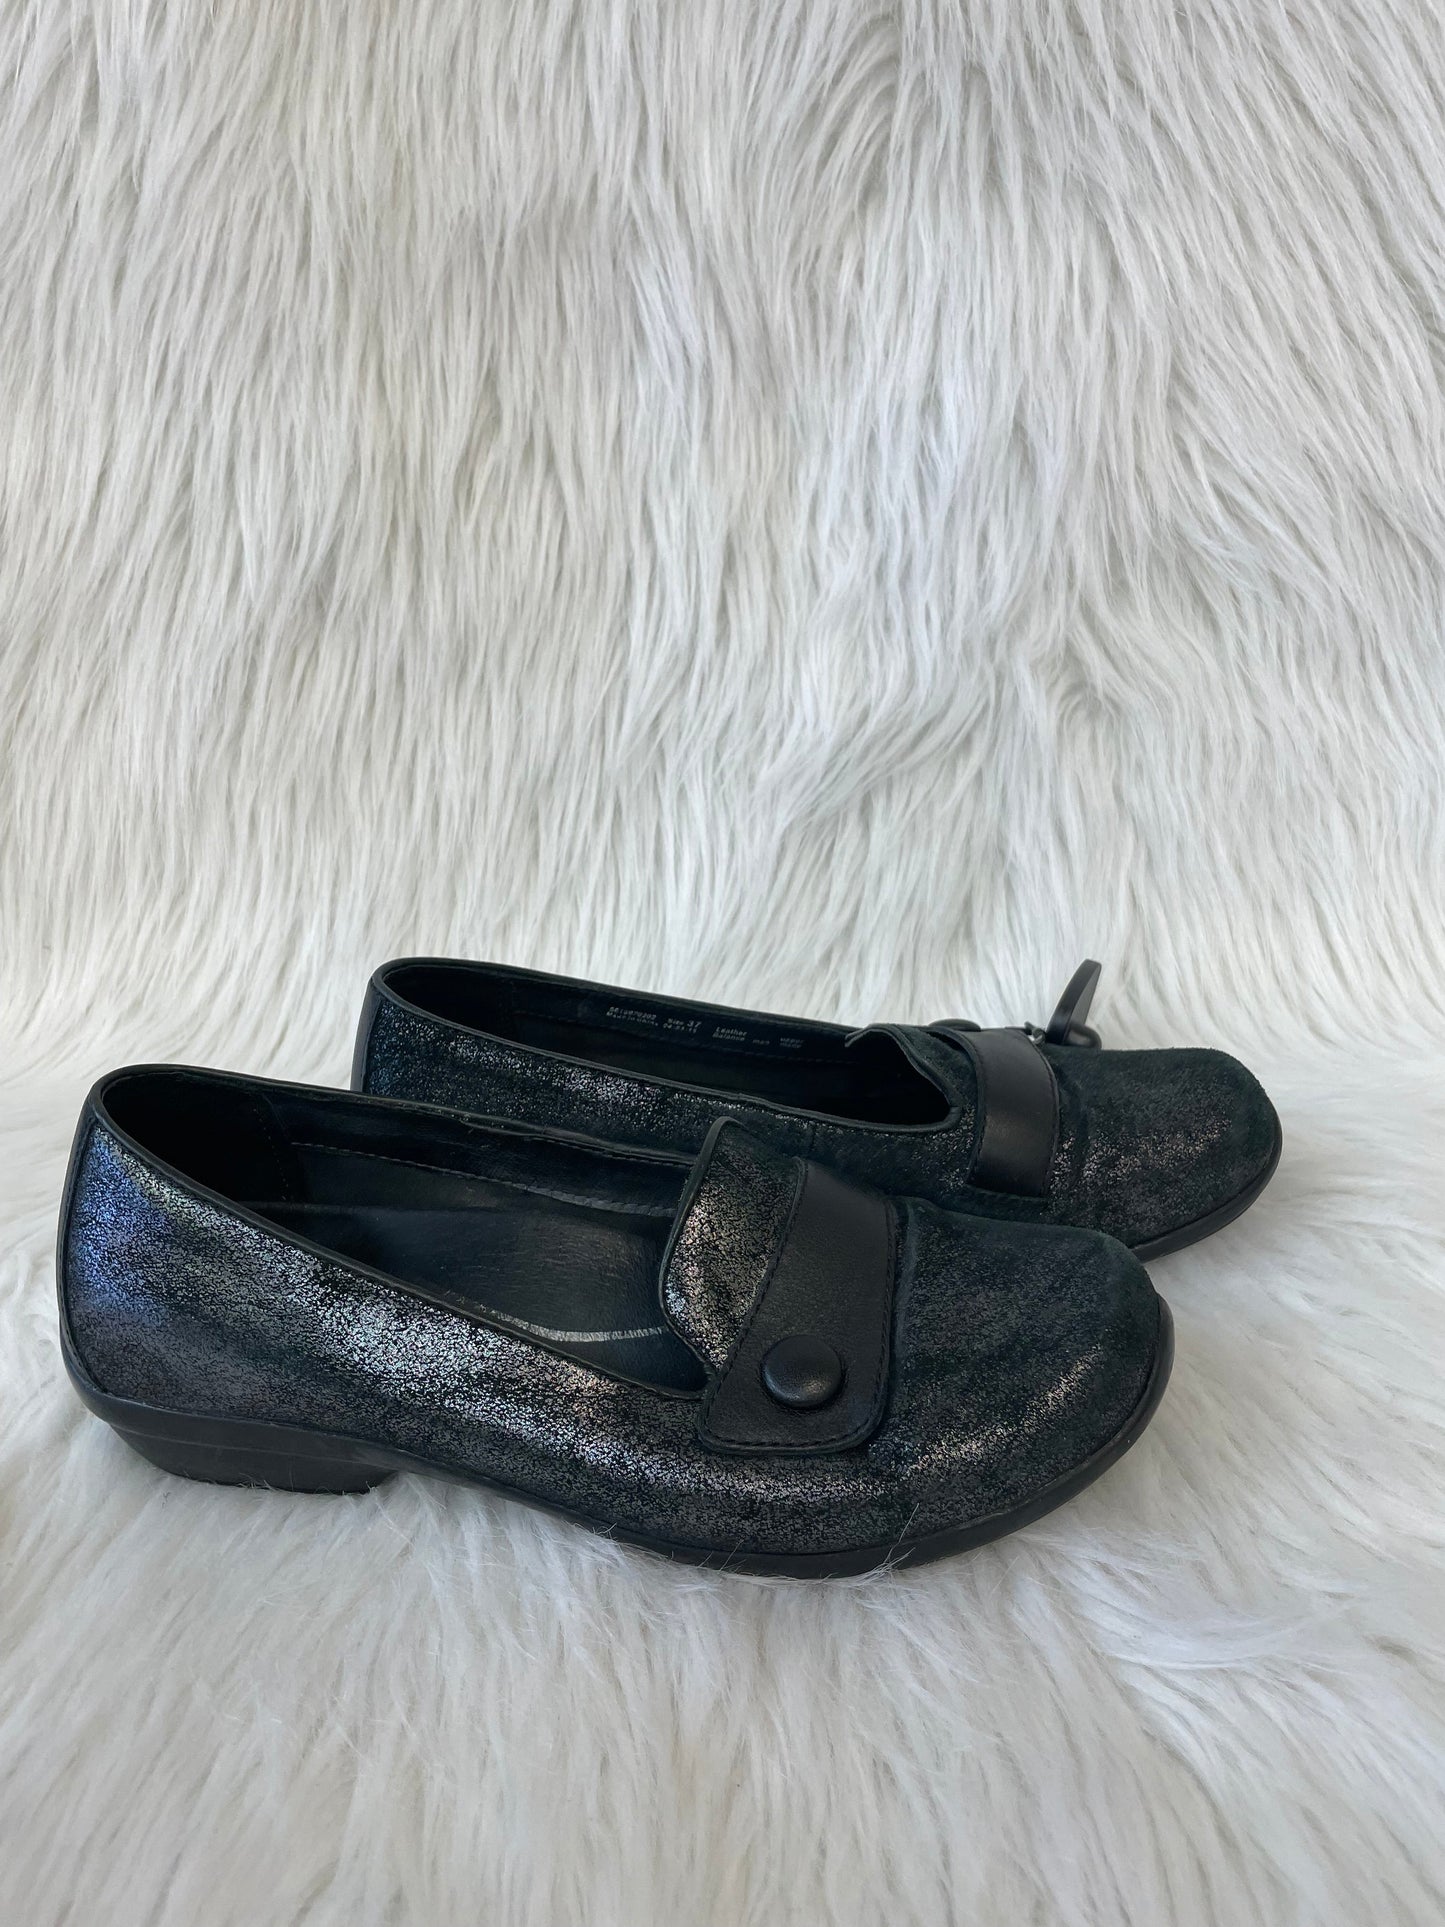 Shoes Flats Other By Dansko  Size: 6.5